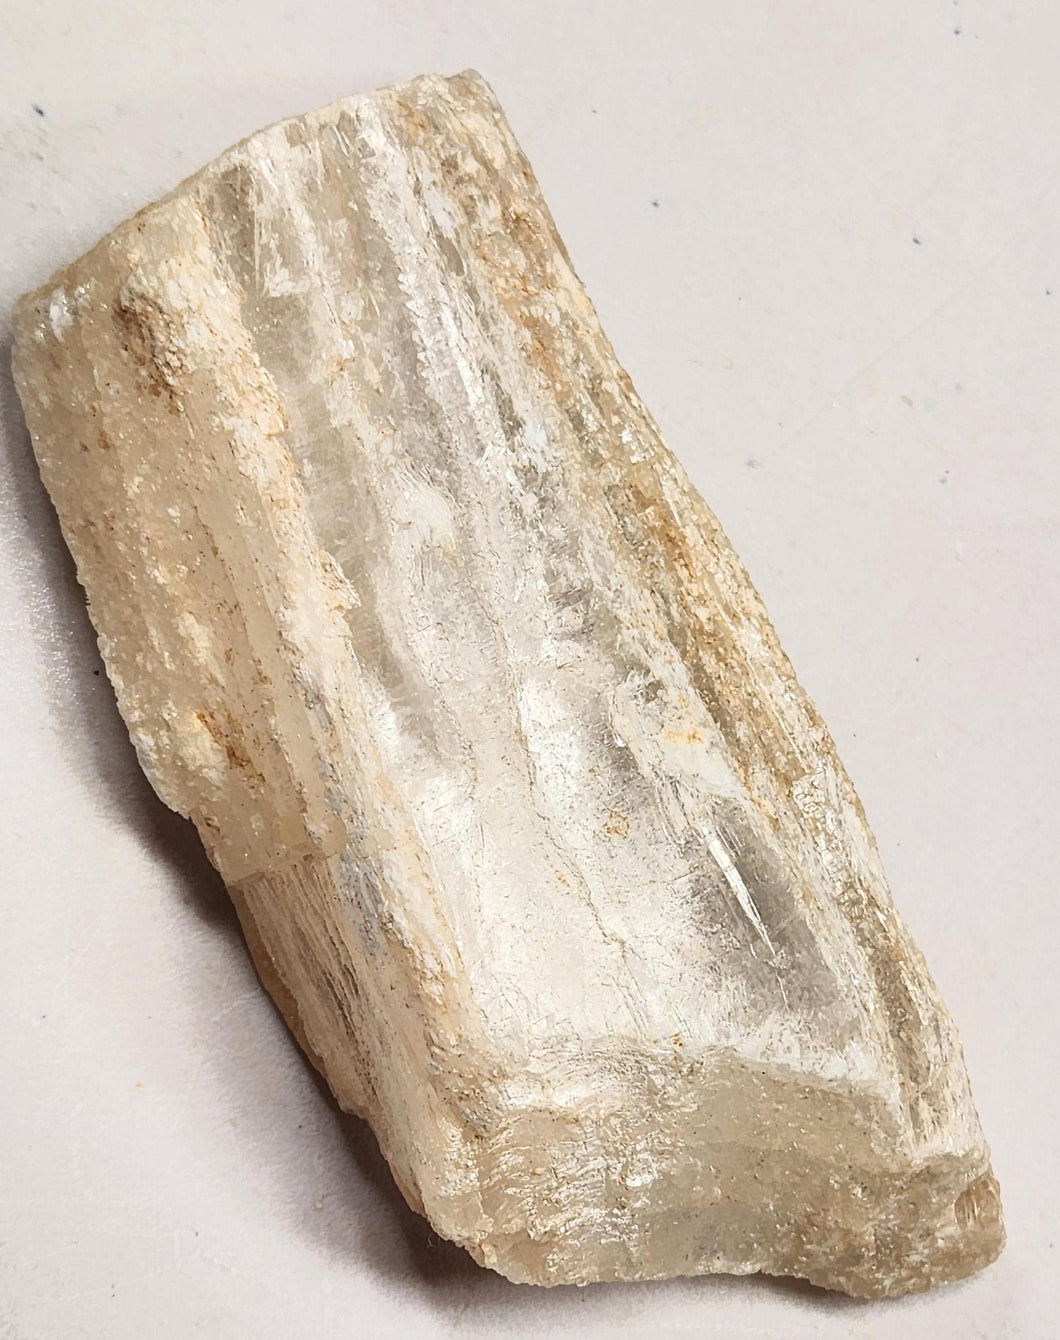 Selenite Cab Rough or Mineral Specimen or Metaphysical Healing Stone Sel1